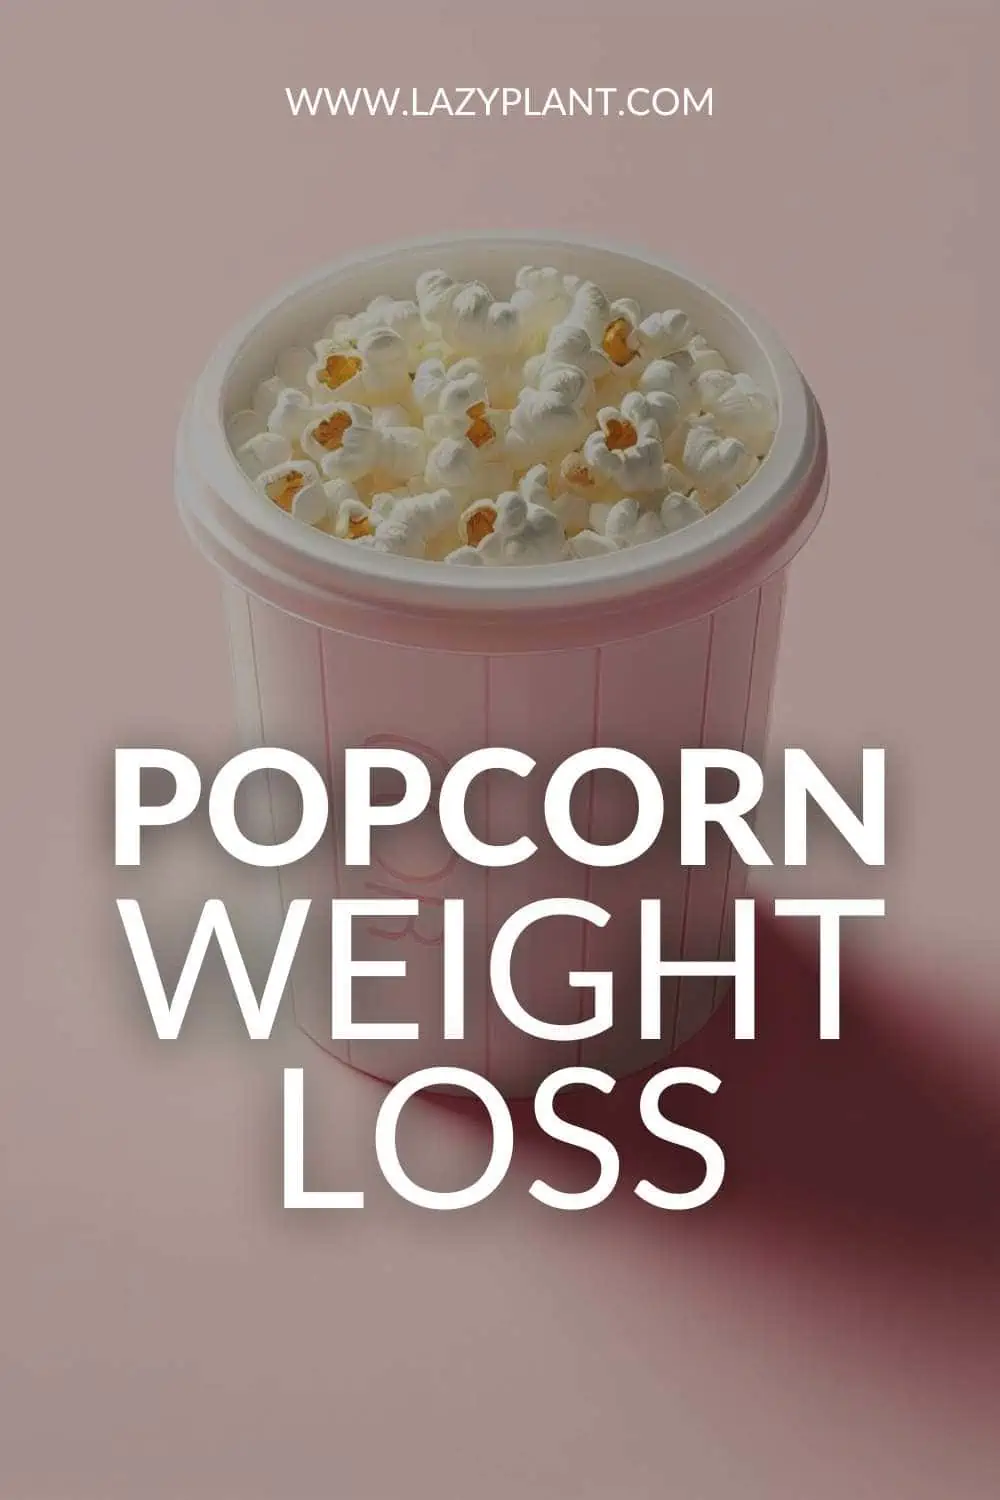 Eating Popcorn on a Diet